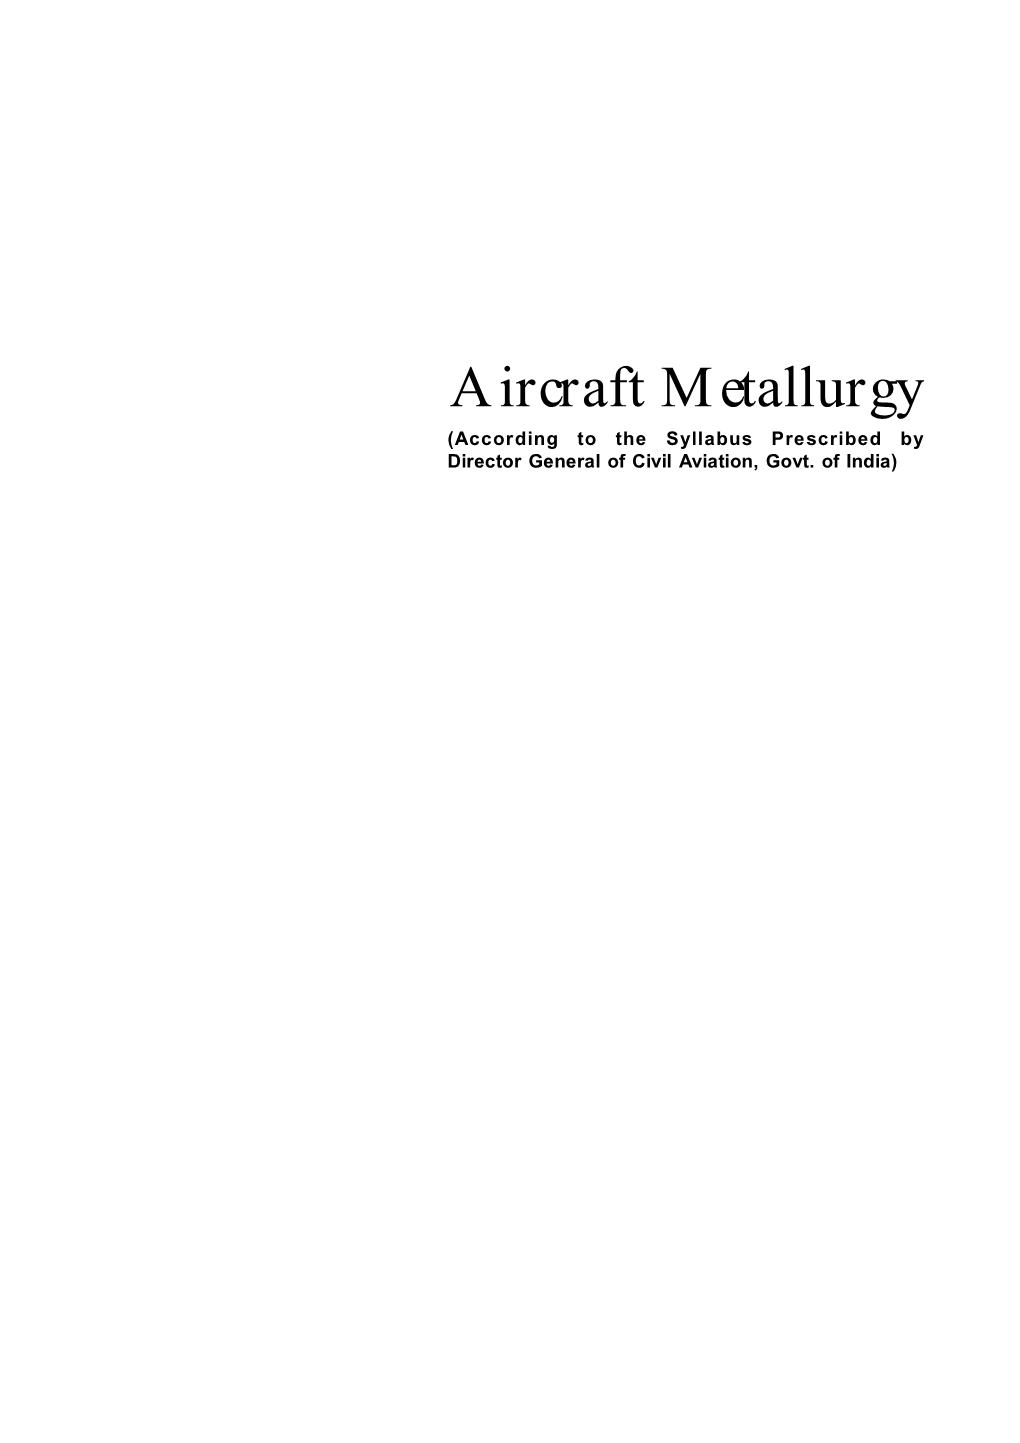 Aircraft Metallurgy (According to the Syllabus Prescribed by Director General of Civil Aviation, Govt